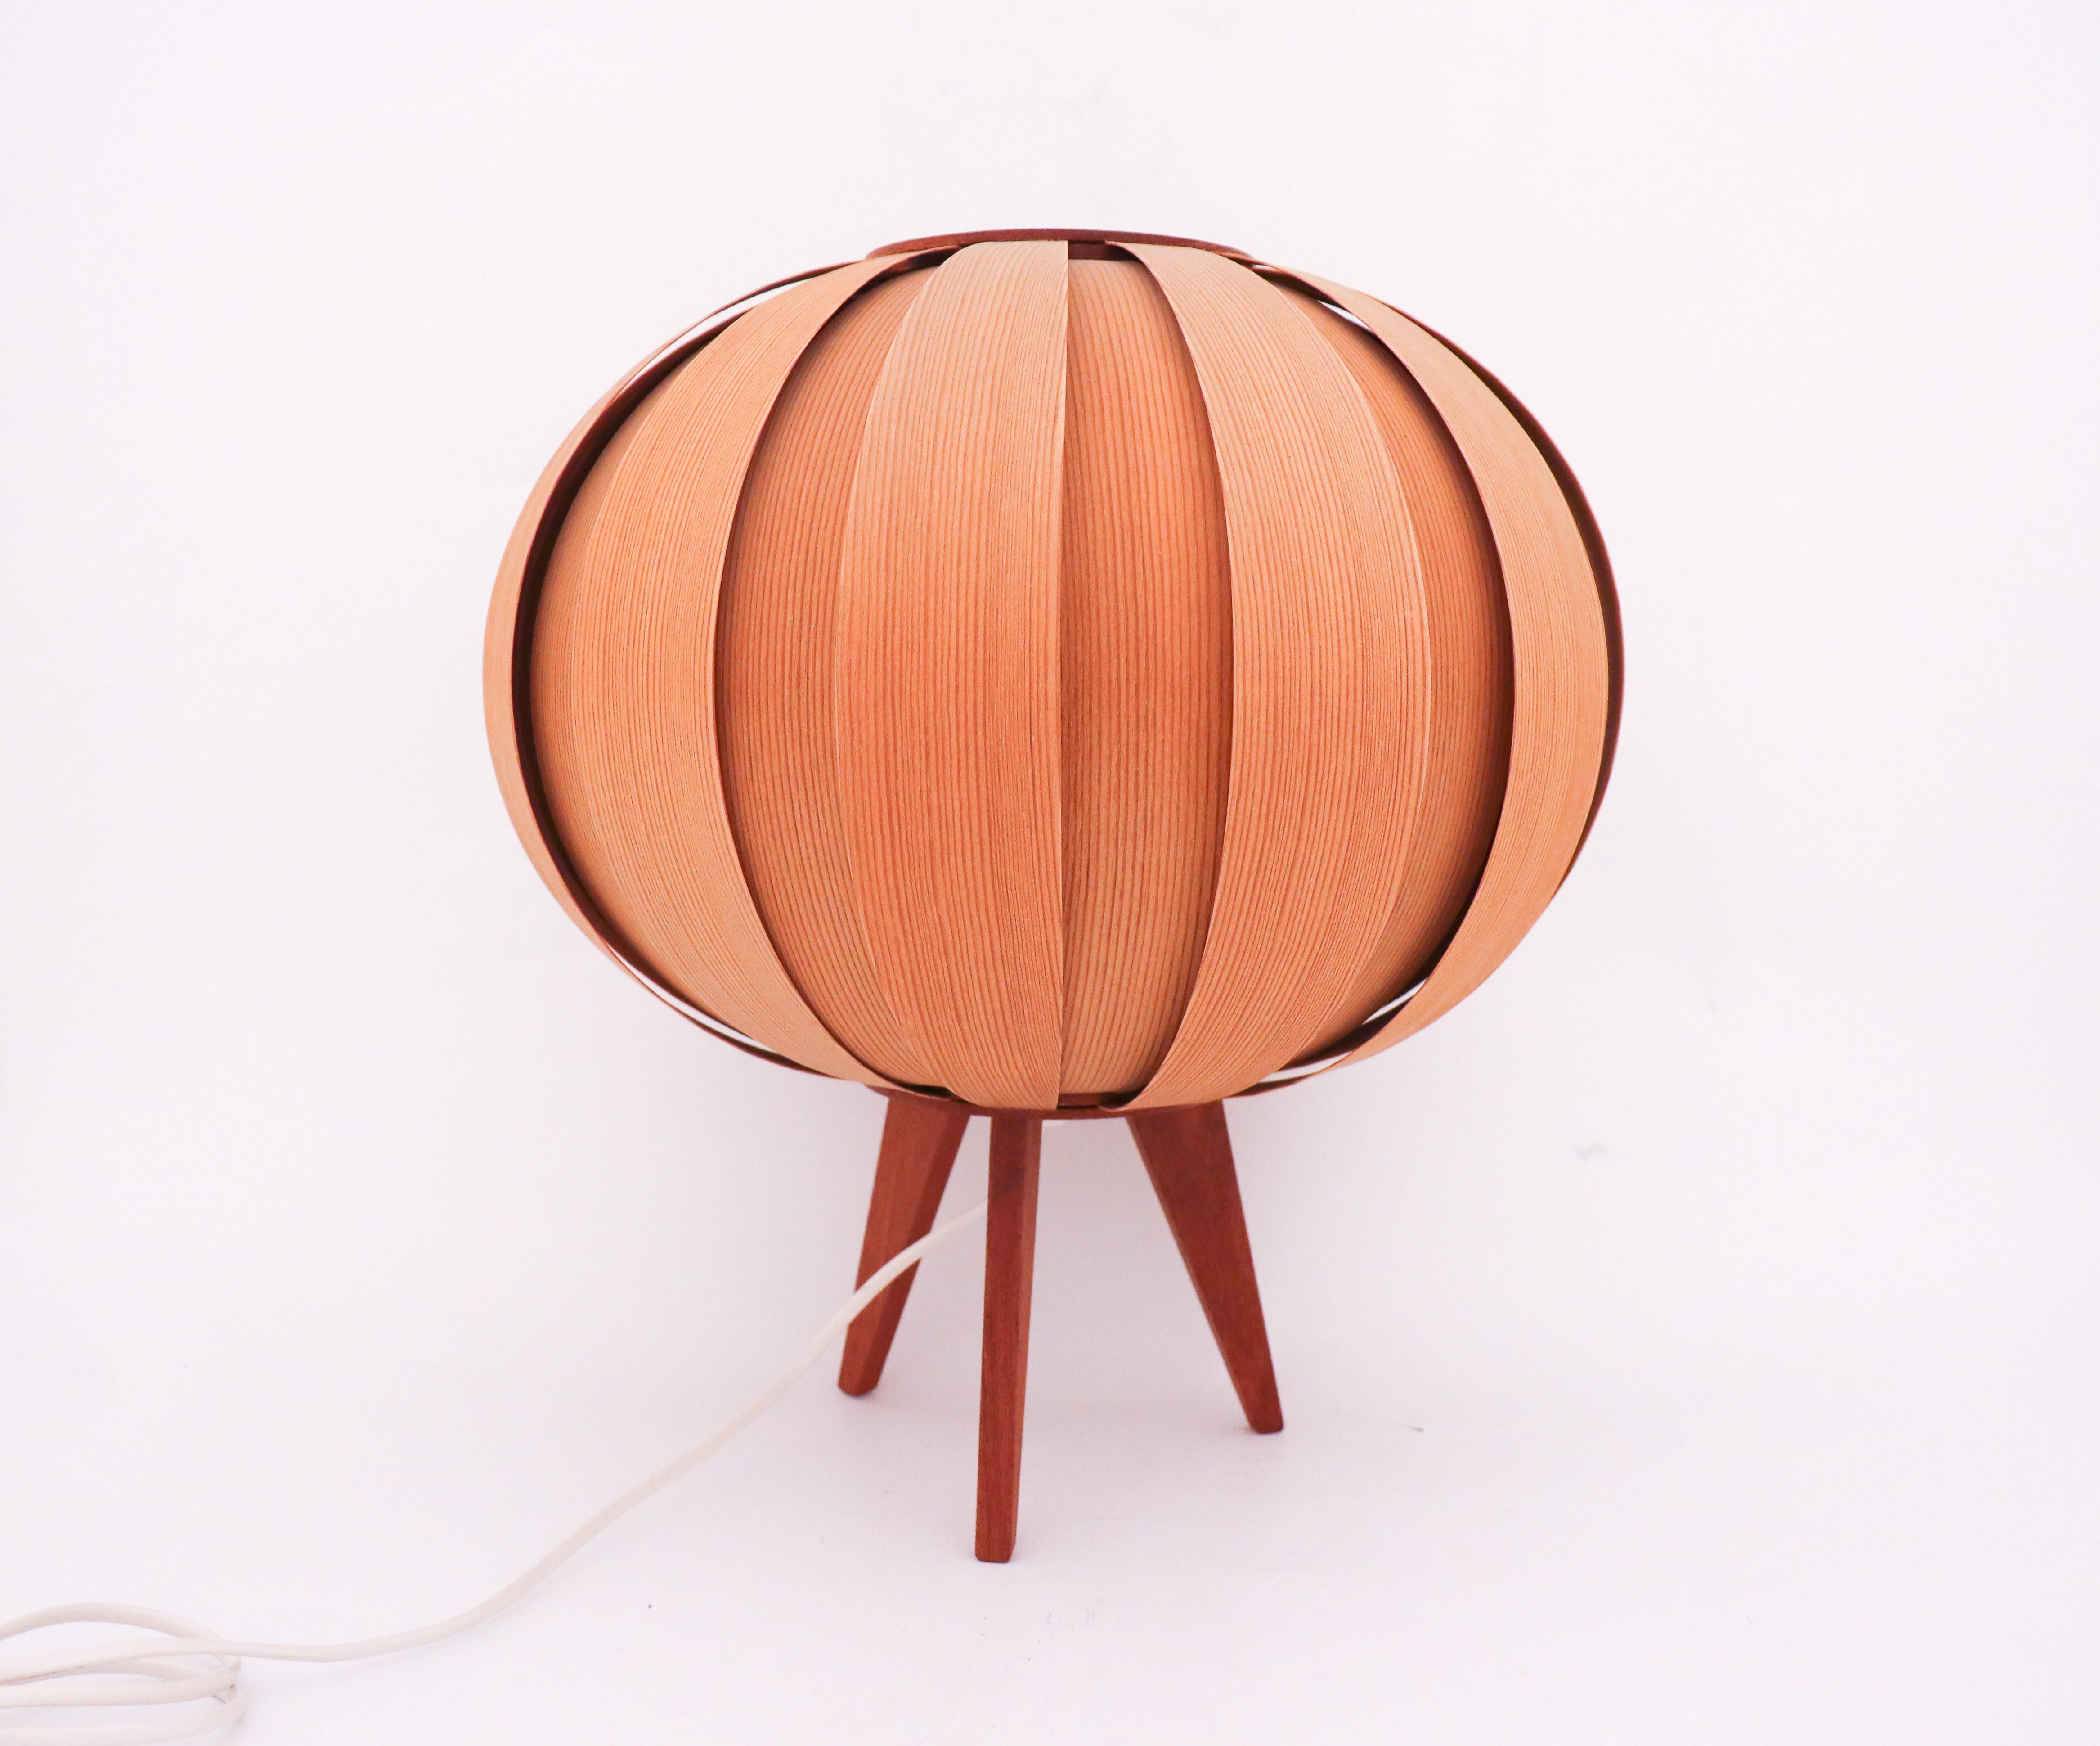 Wooden Pine Table Lamp Hans-Agne Jakobsson, Scandinavian Modern In Good Condition For Sale In Stockholm, SE